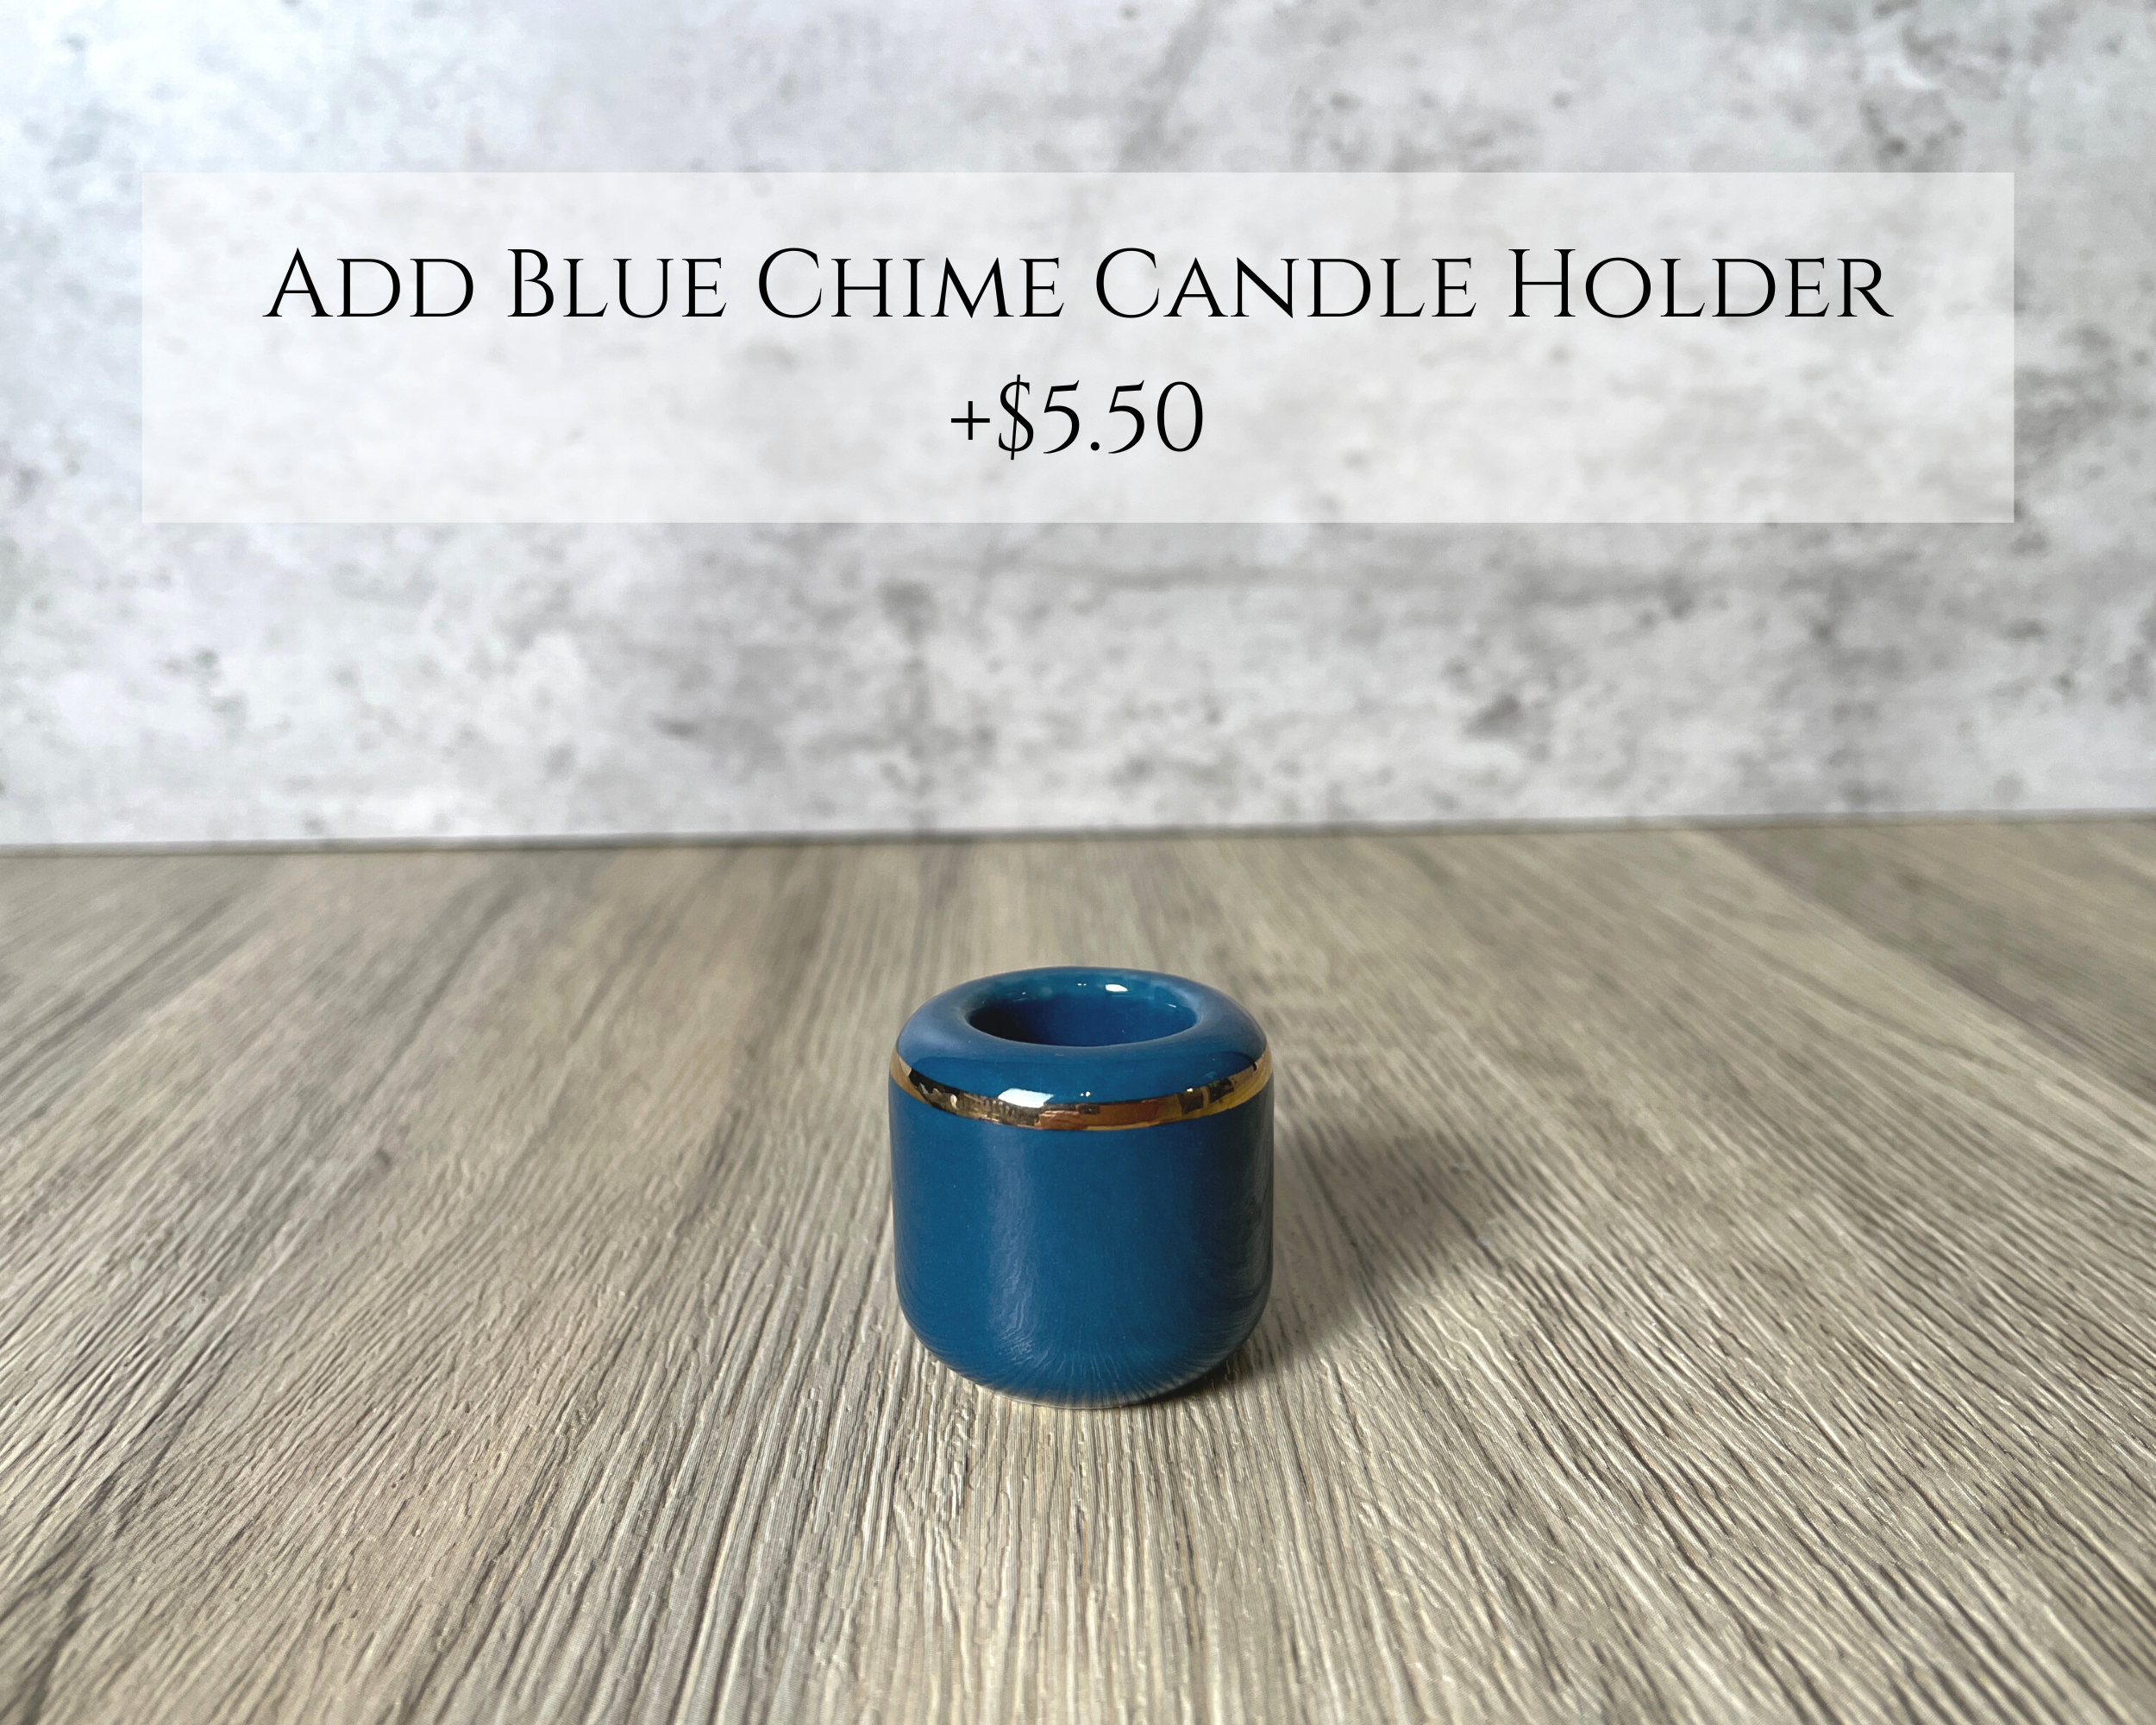 Buy Online Latest and Unique Blue Chime Candles 4" Inch - Health, Harmony, Balance, Communication | Shop Best Spiritual Items - The Mystical Ritual